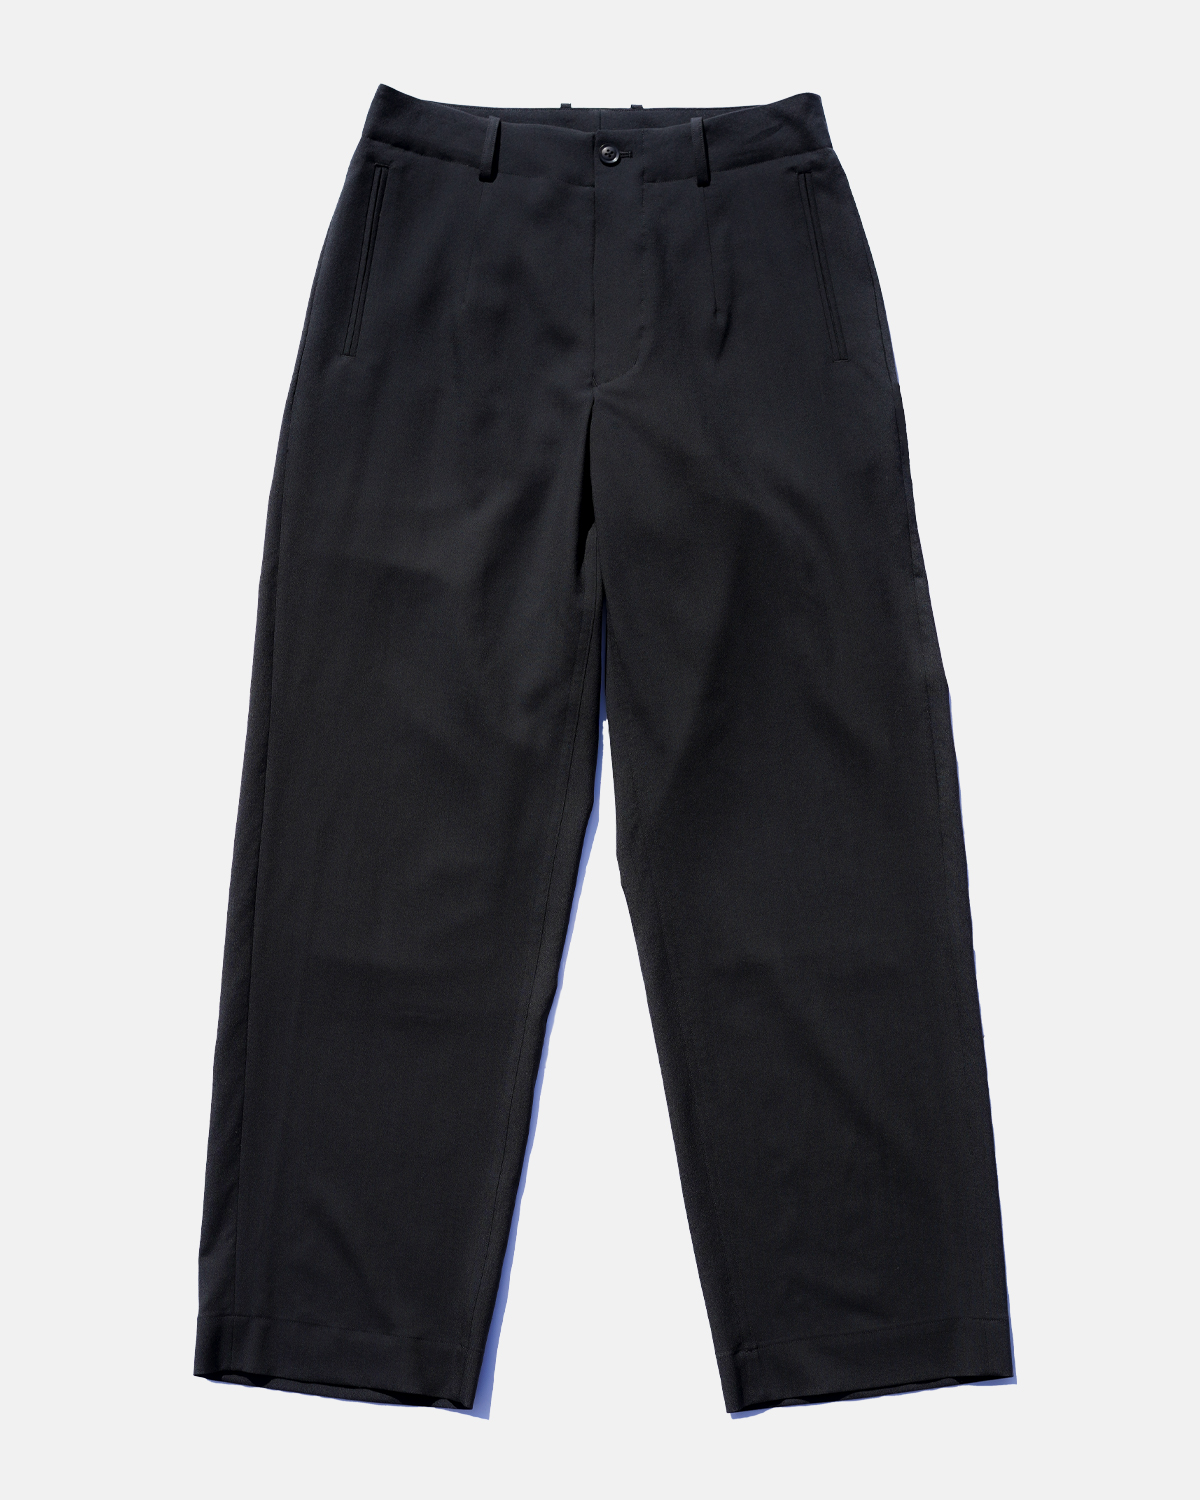 CES OUR USUALLY TROUSERS - Black｜CES